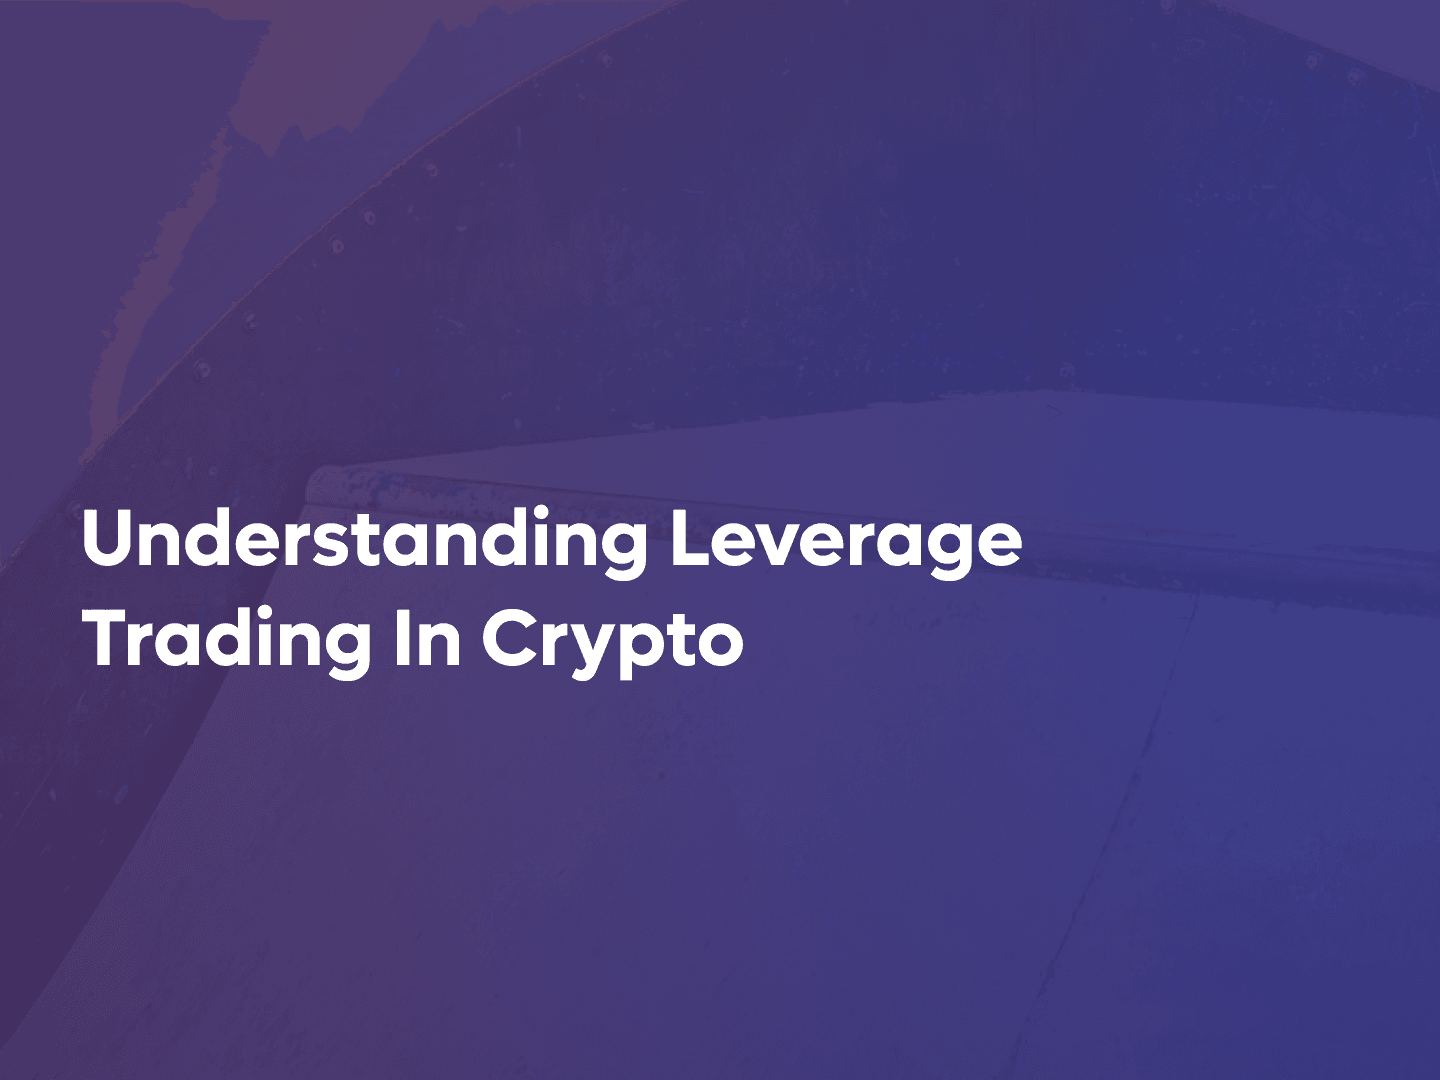 Understanding Leverage Trading in Crypto